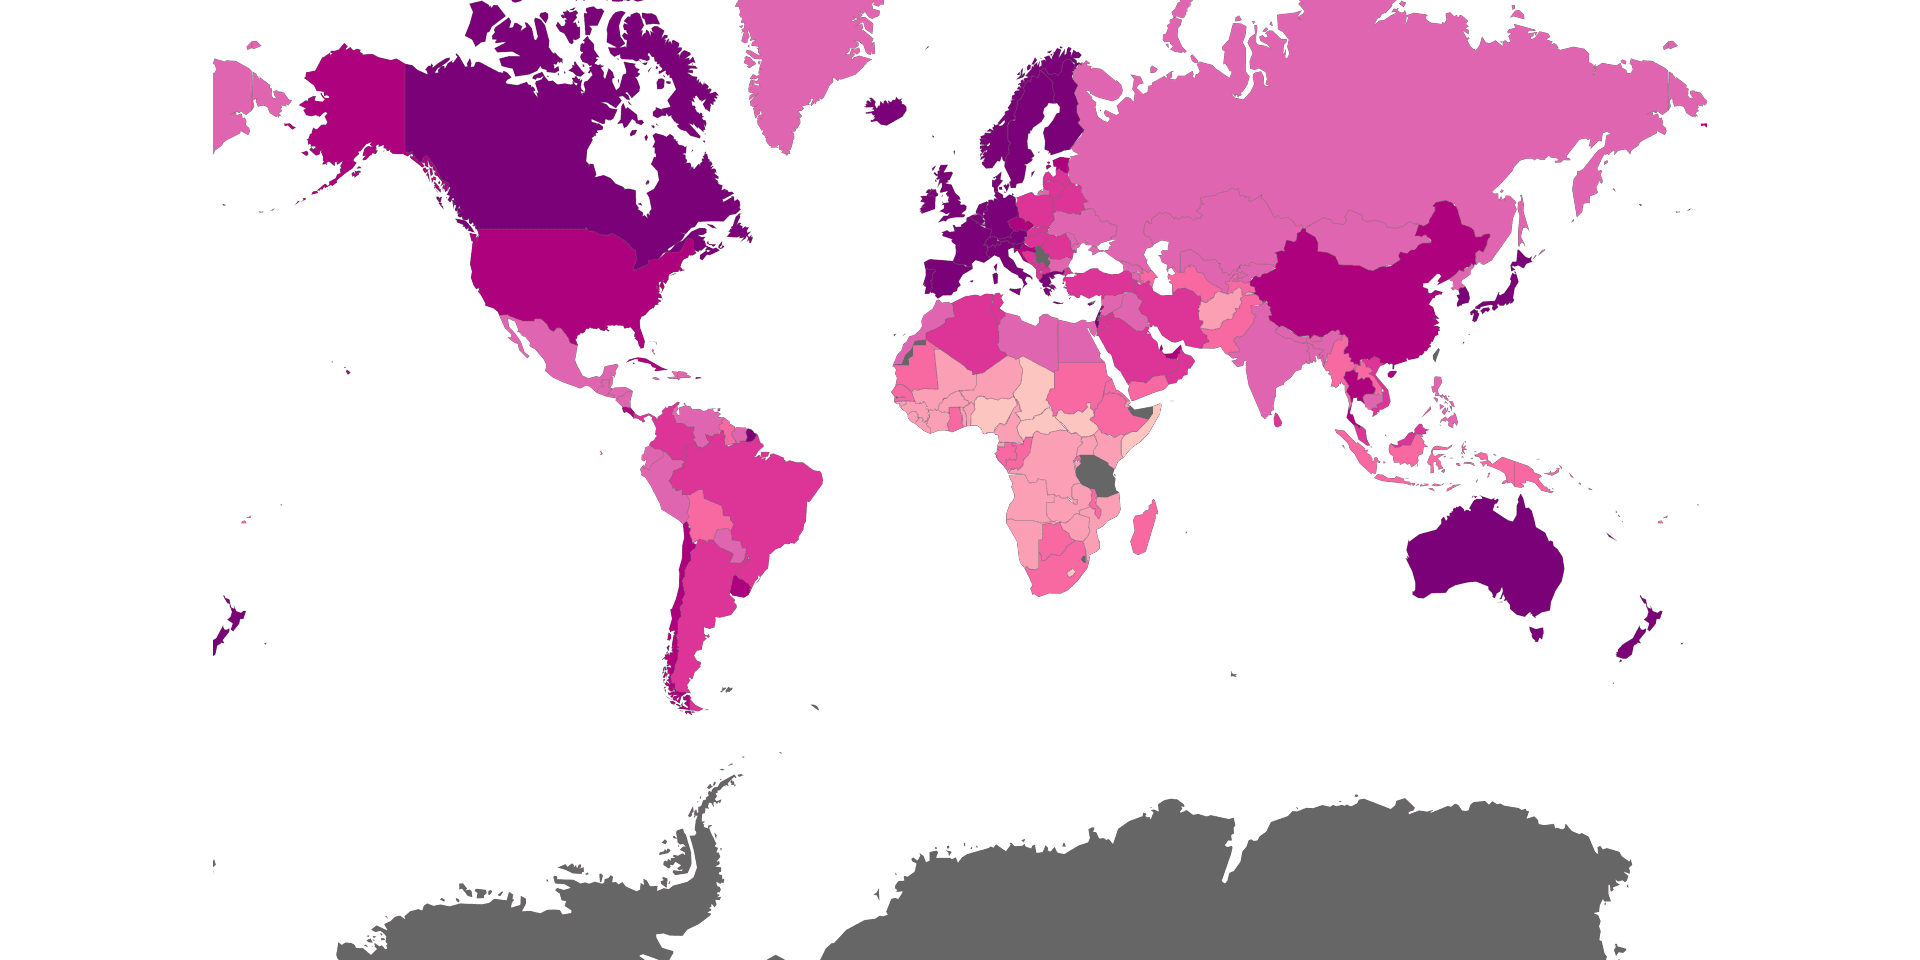 Global Life Expectancy (2020) Map